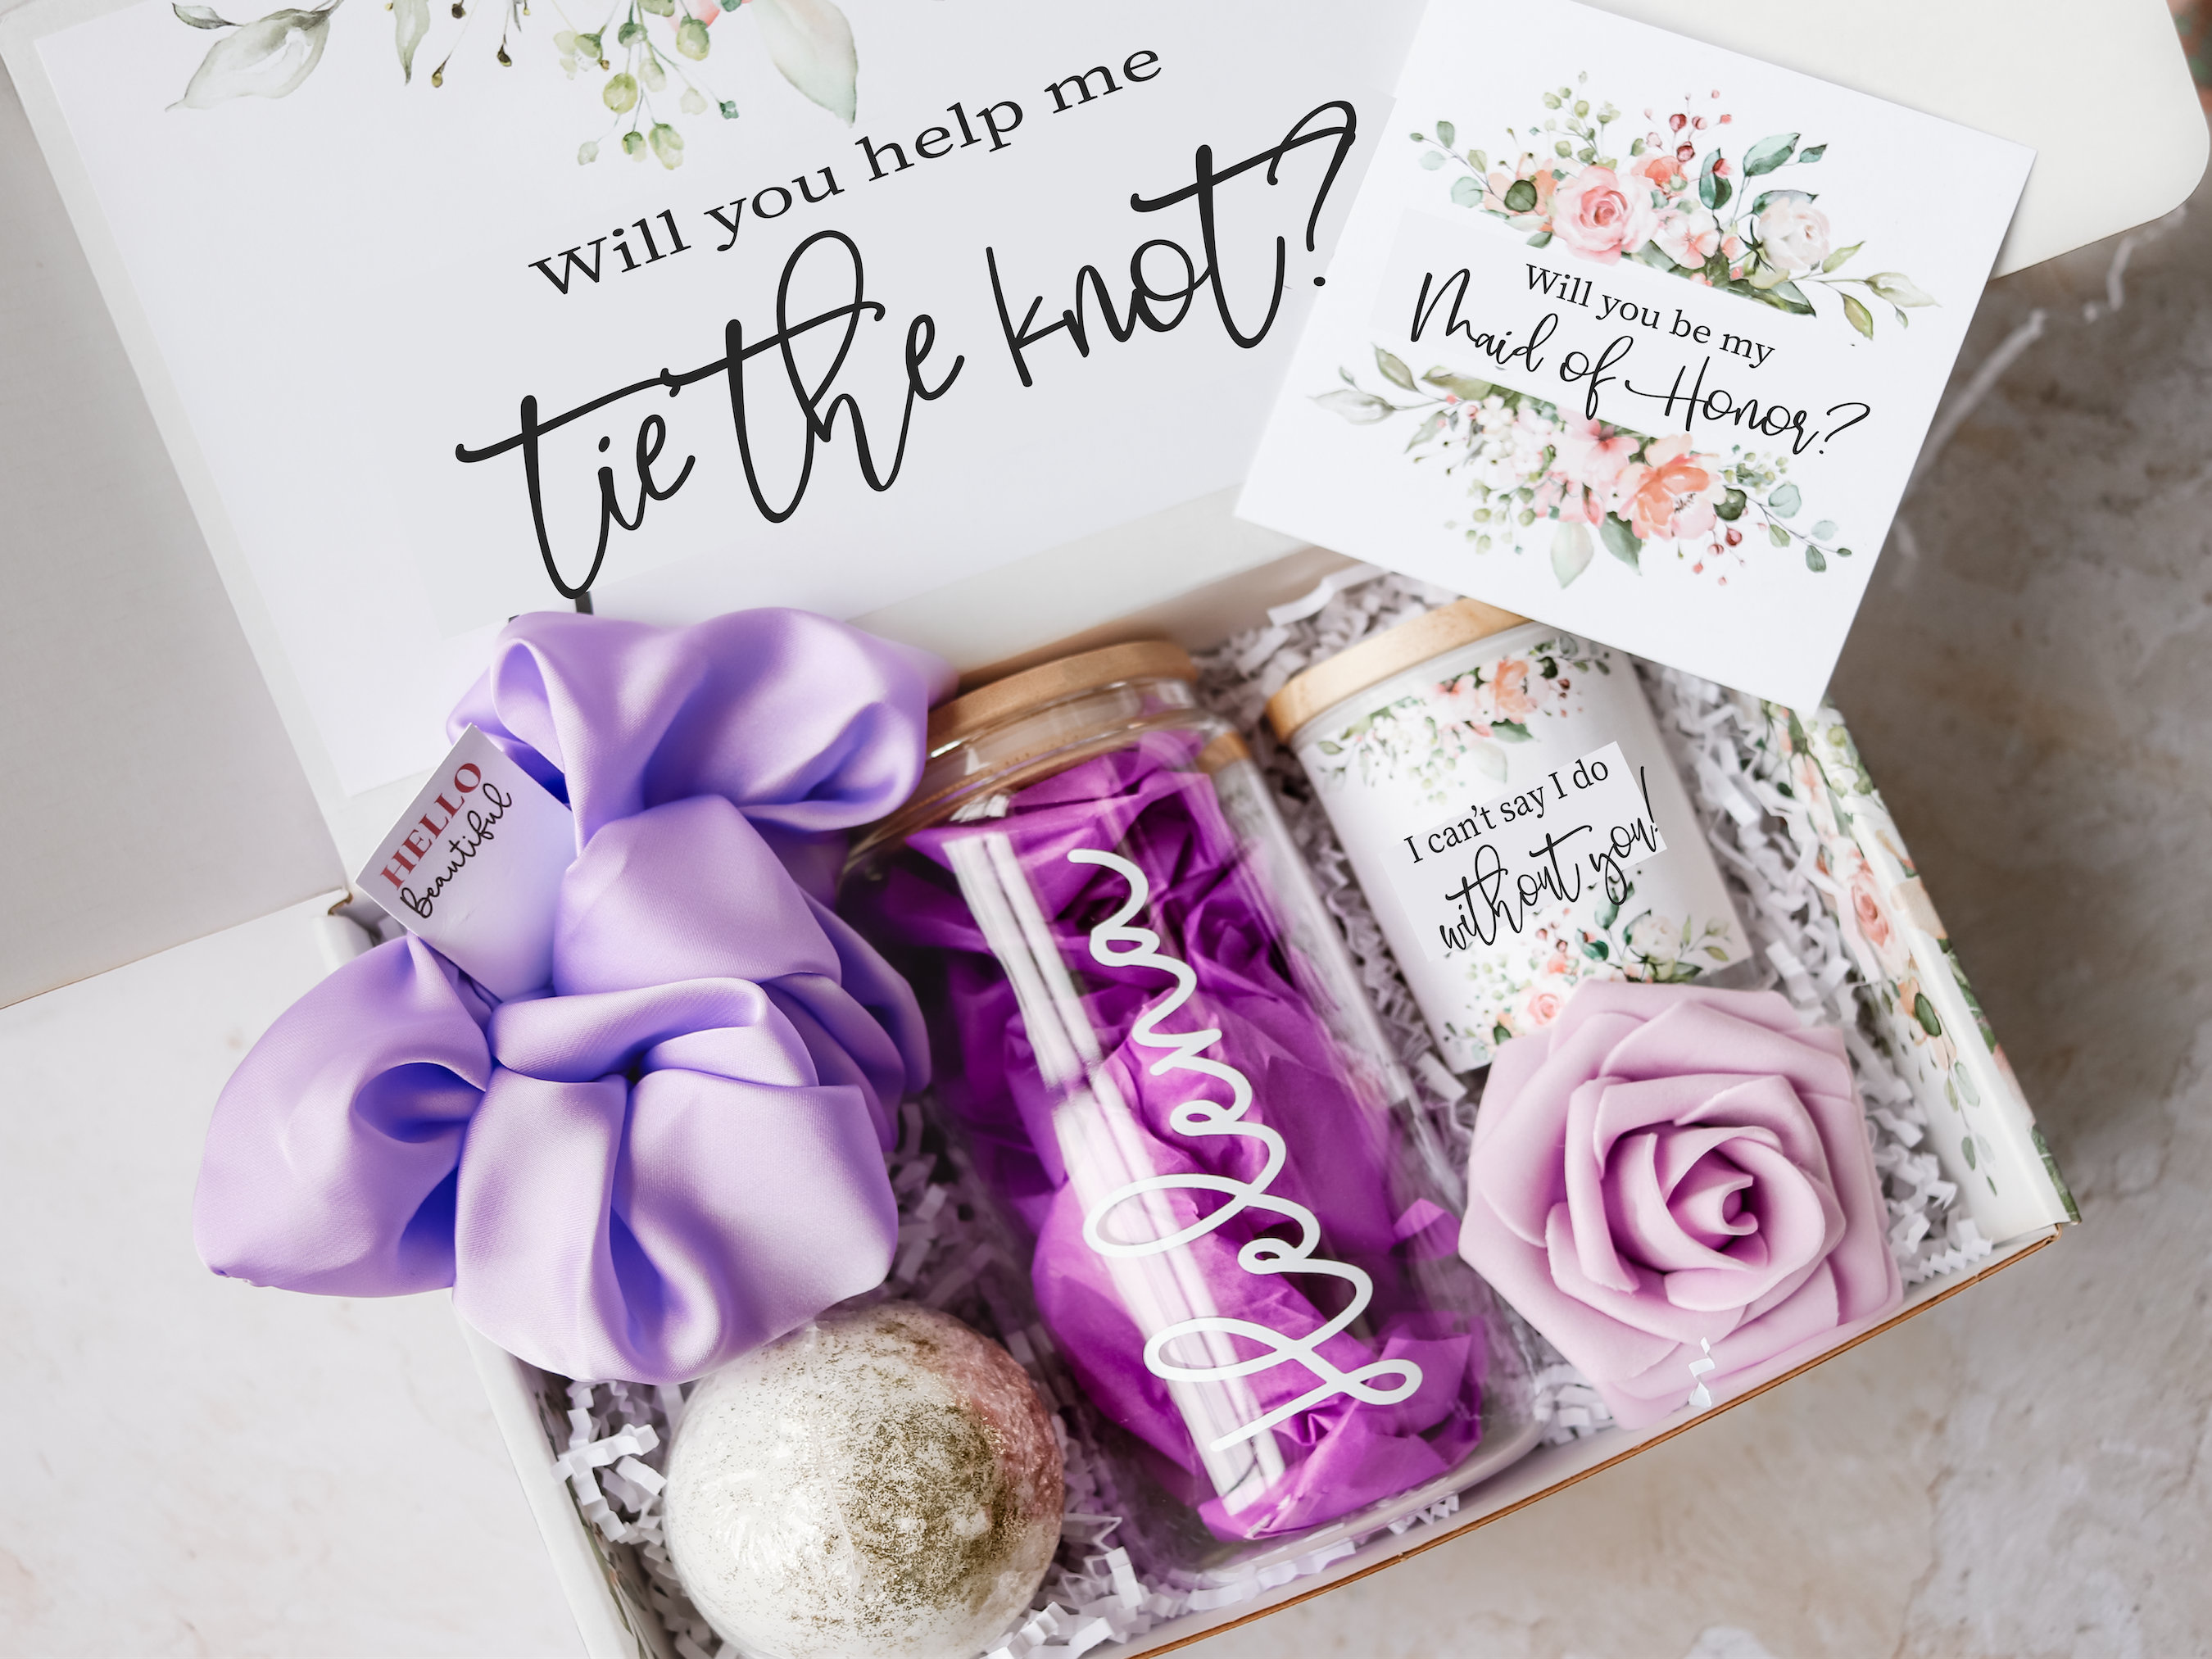  Heather & WIllow Bridesmaid Proposal Box with Bridesmaid Gifts, Bridesmaid Proposal Gifts for Wedding Registry, Bridal Gift Boxes with  Lids